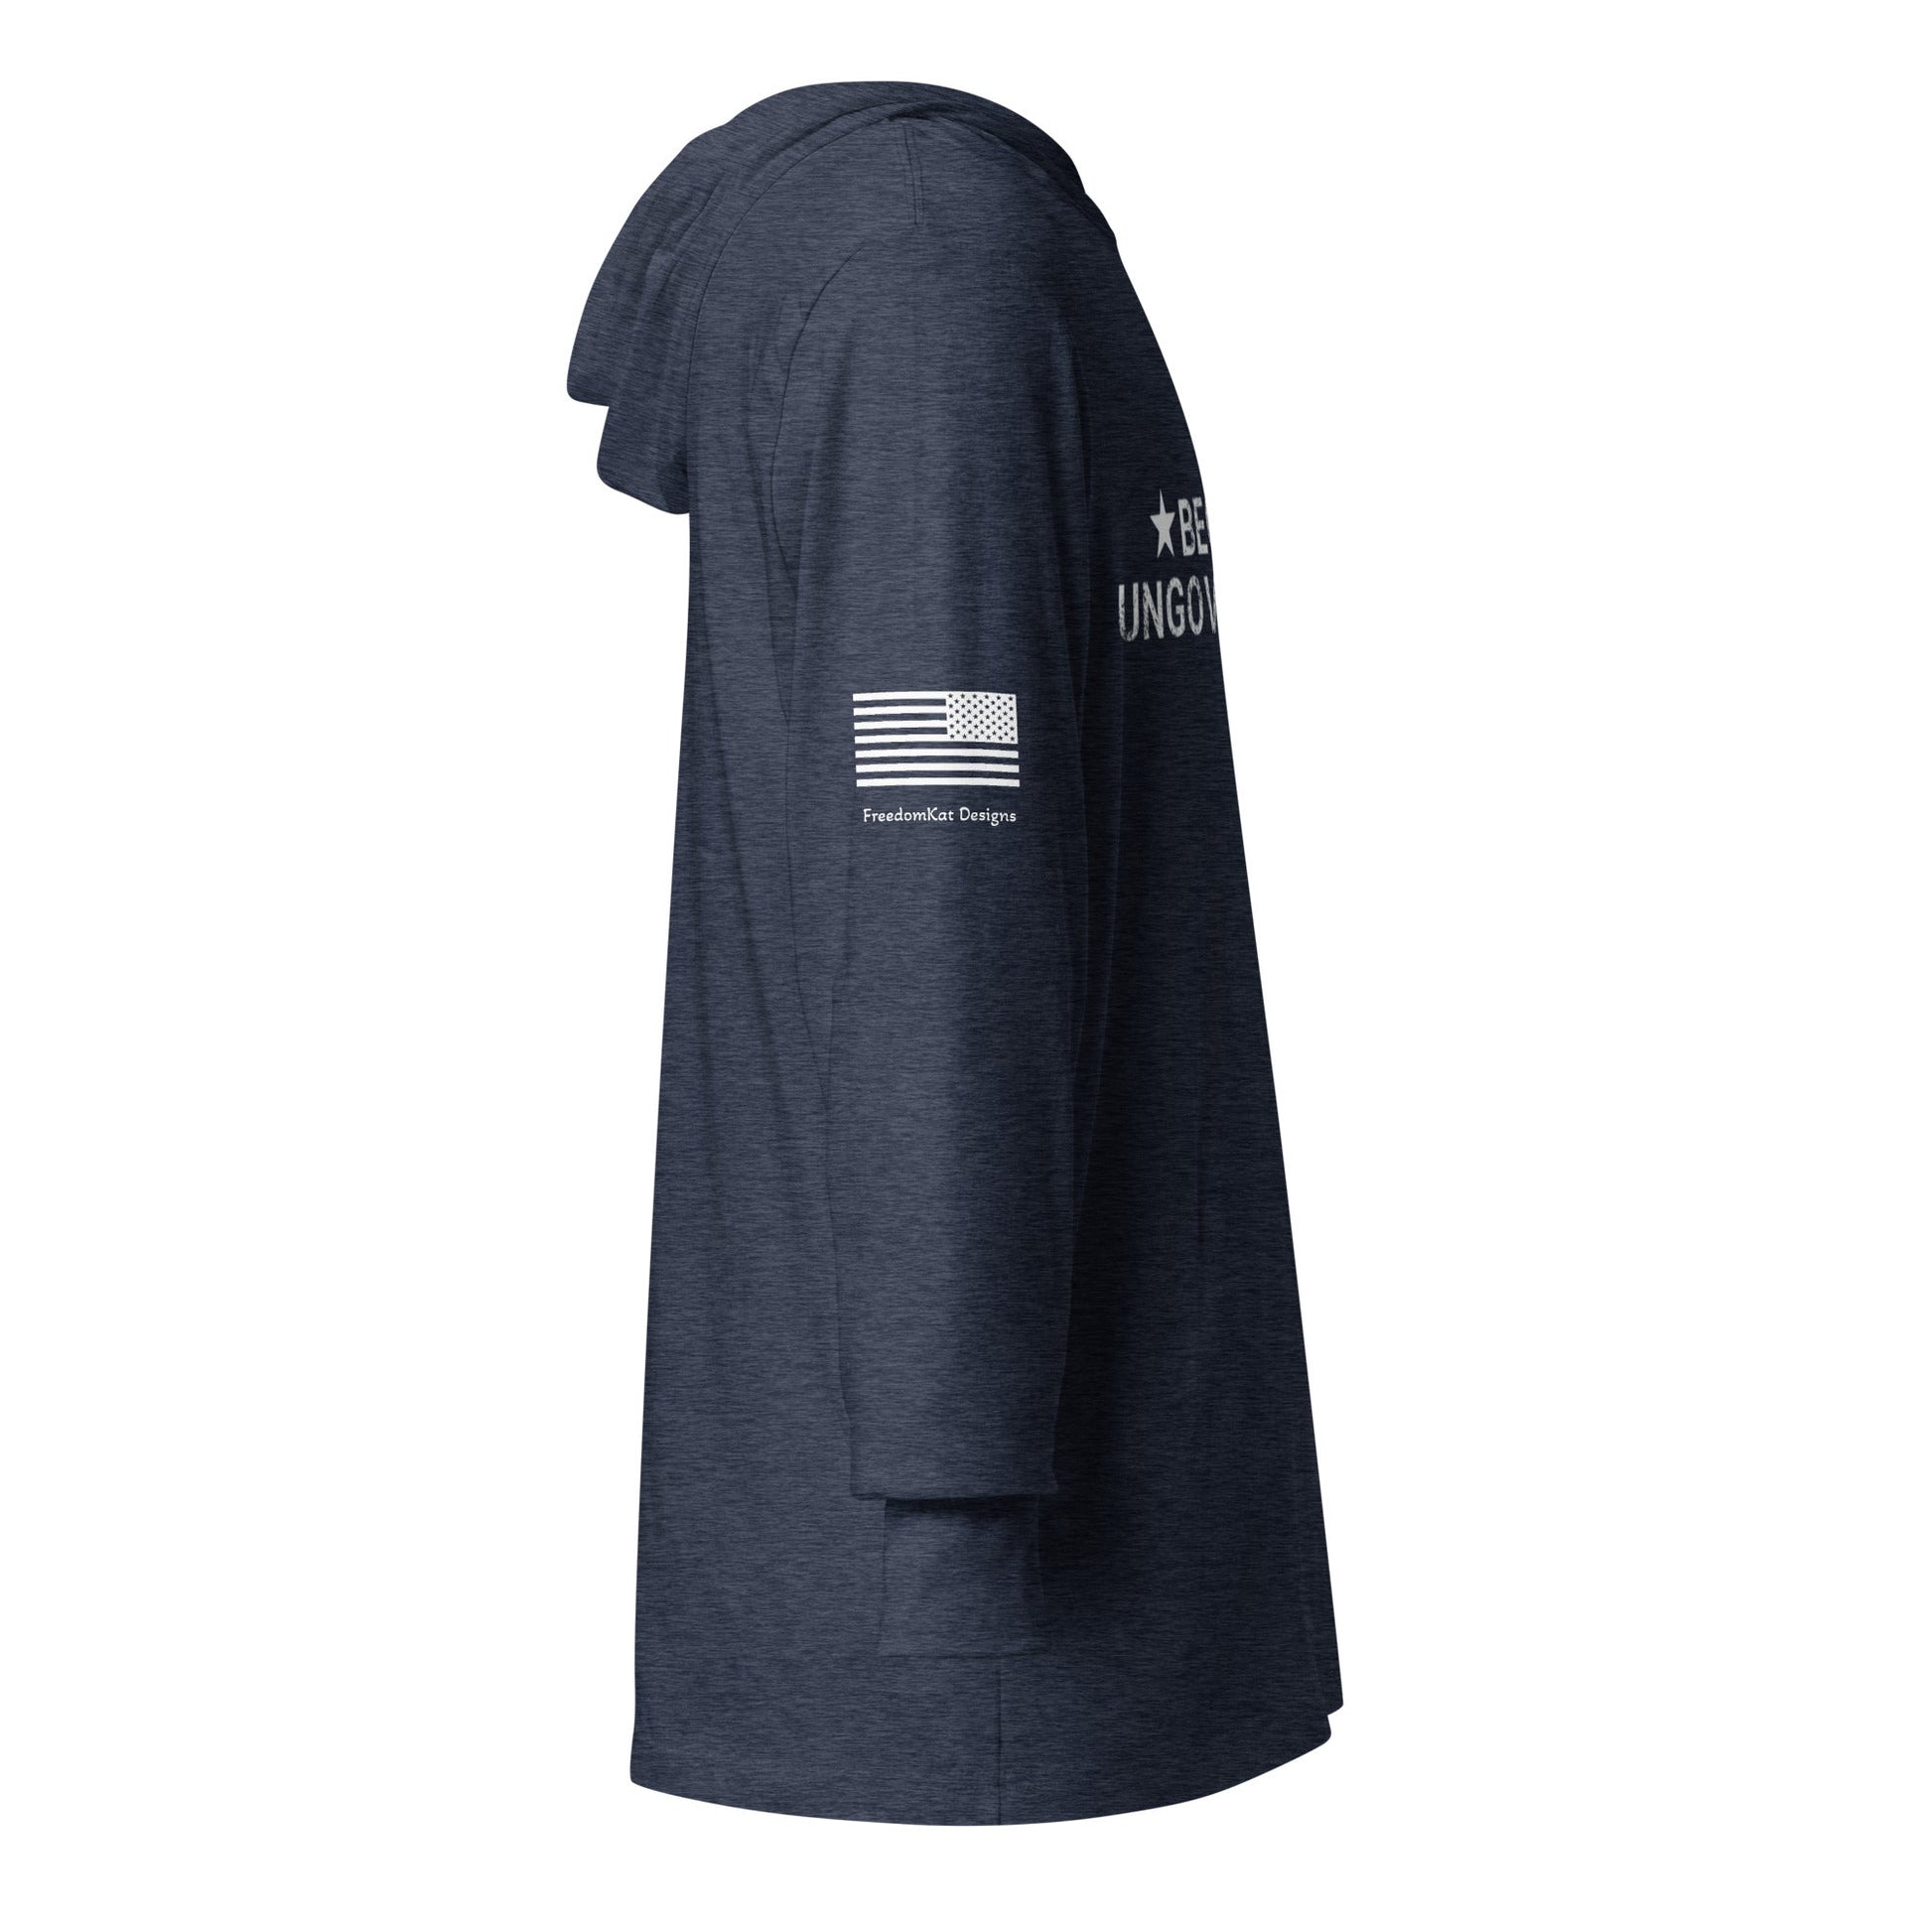 FreedomKat Designs, LLC Become Ungovernable Hooded long-sleeve tee